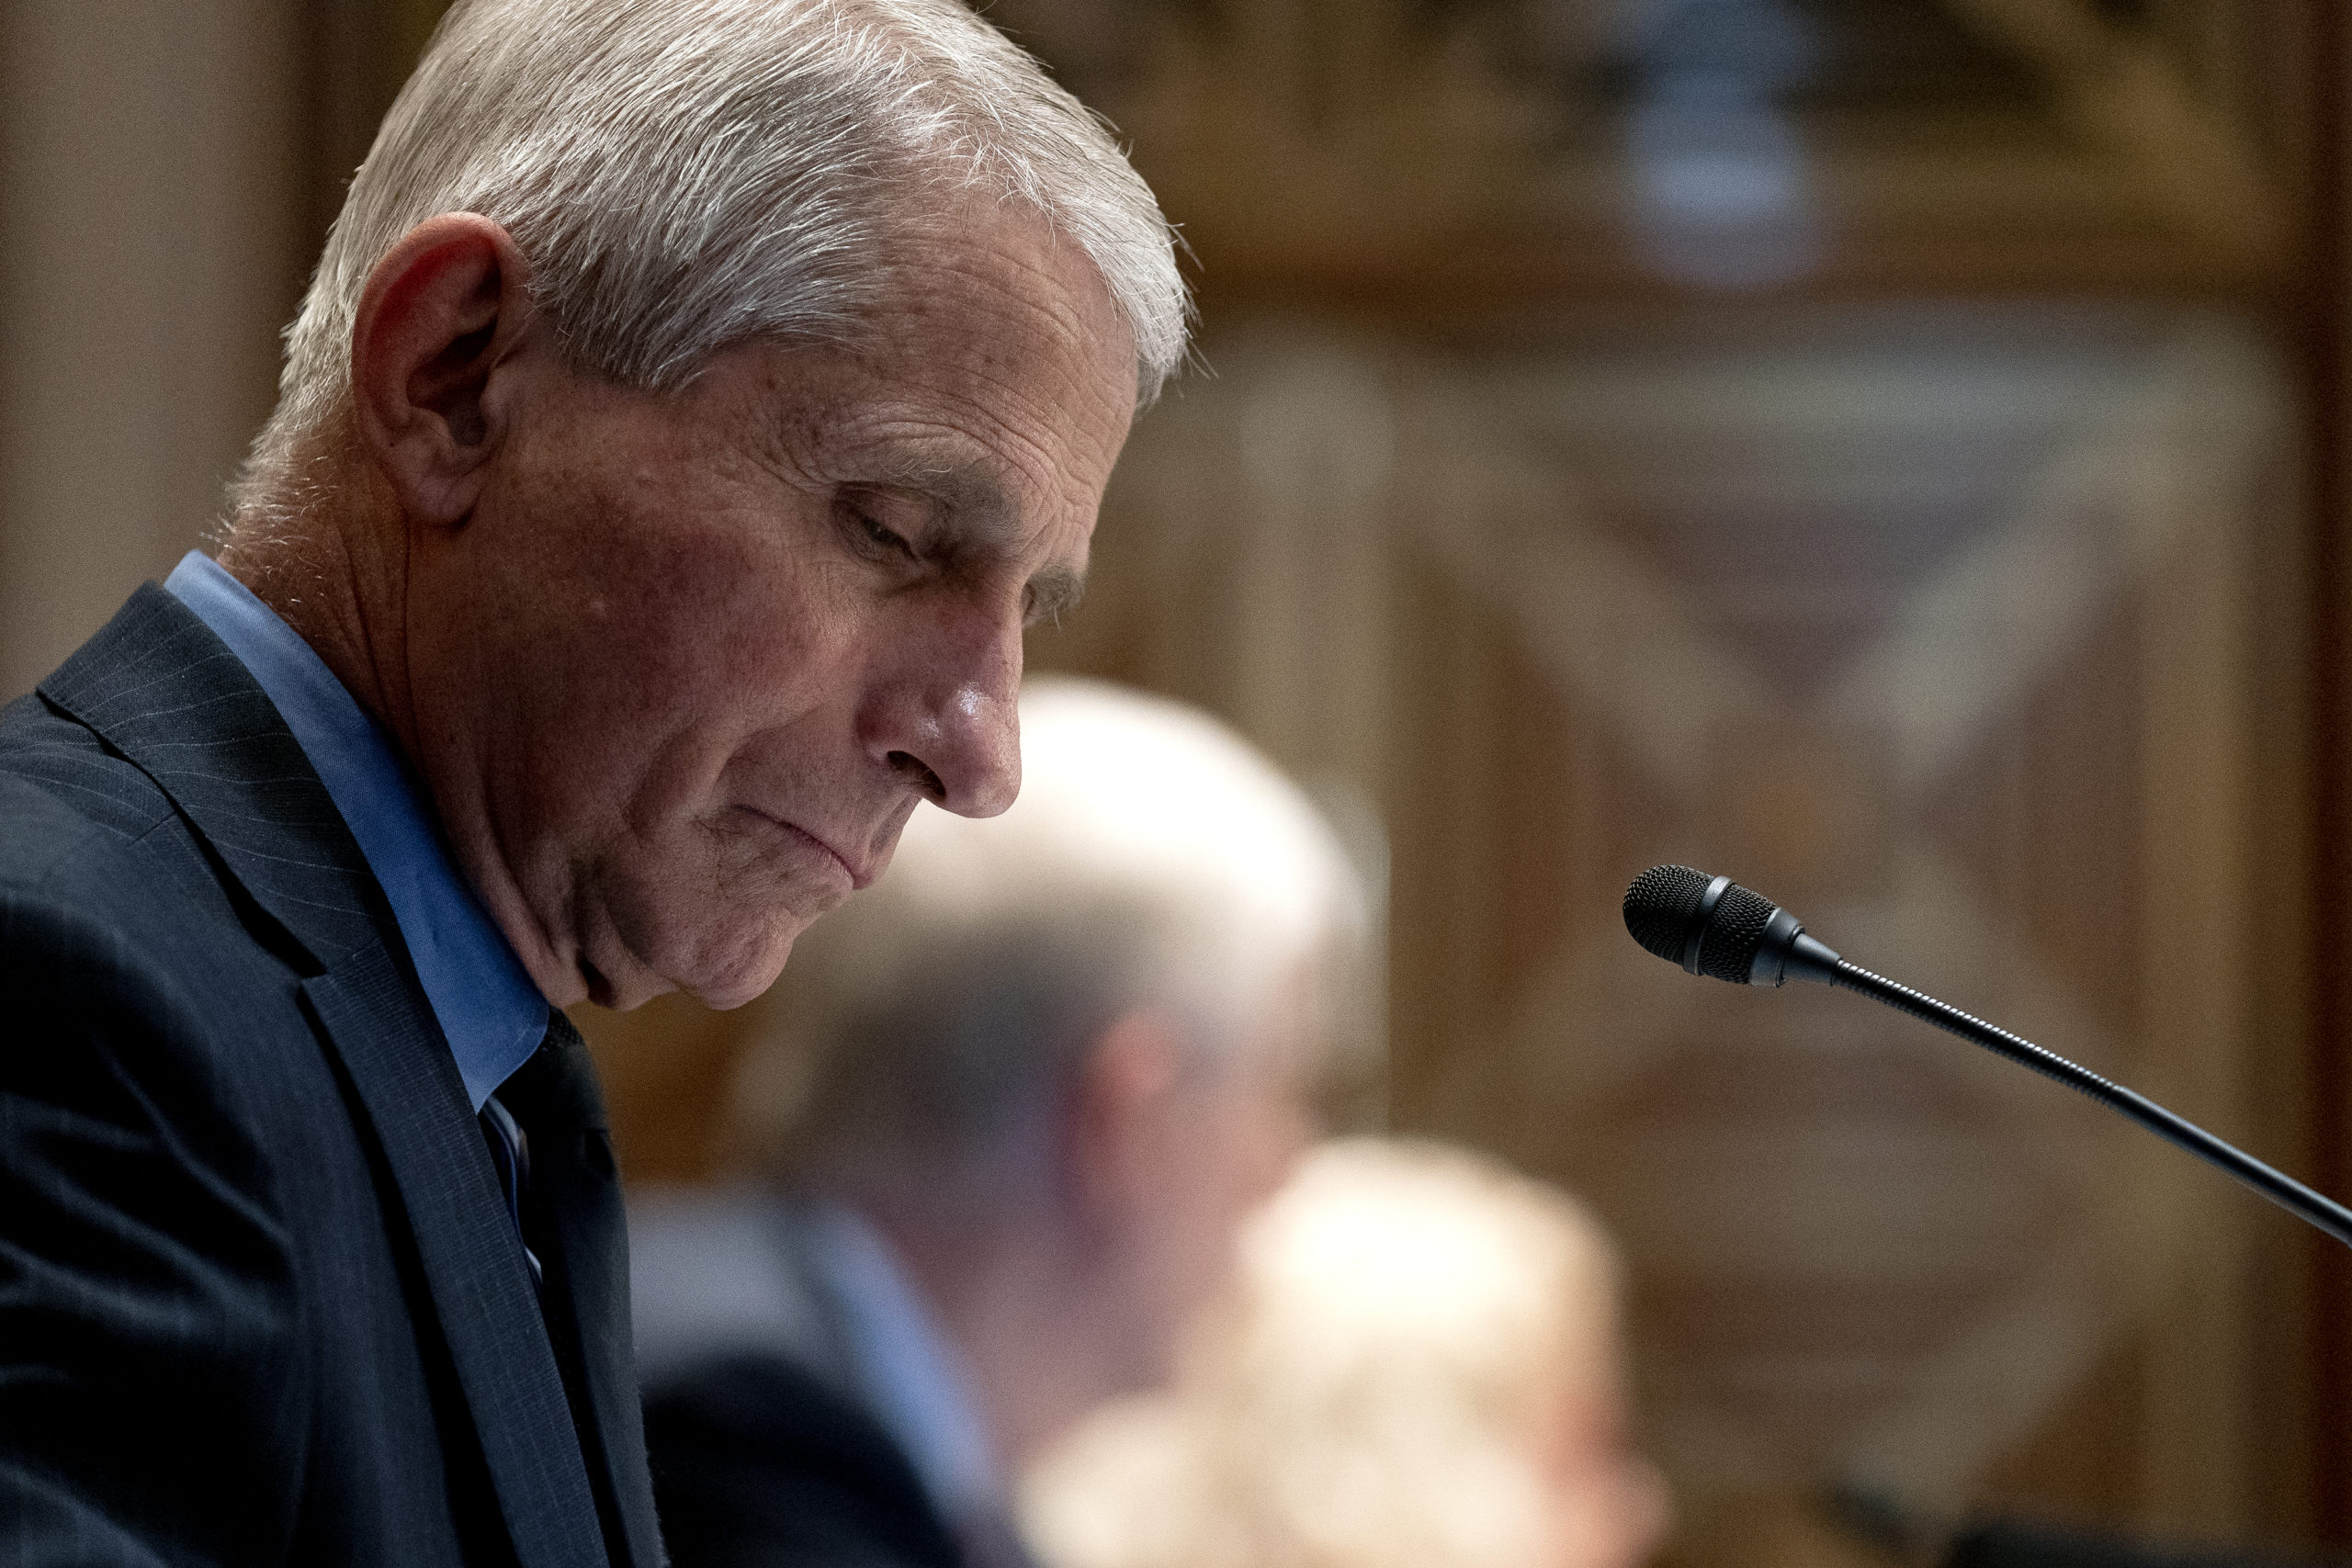 Dr. Anthony Fauci, Director of the National Institute of Allergy and Infectious Diseases, listens during a Senate Appropriations Subcommittee hearing May 26, 2021 on Capitol Hill in Washington, D.C. (Photo by Stefani Reynolds-Pool/Getty Images)